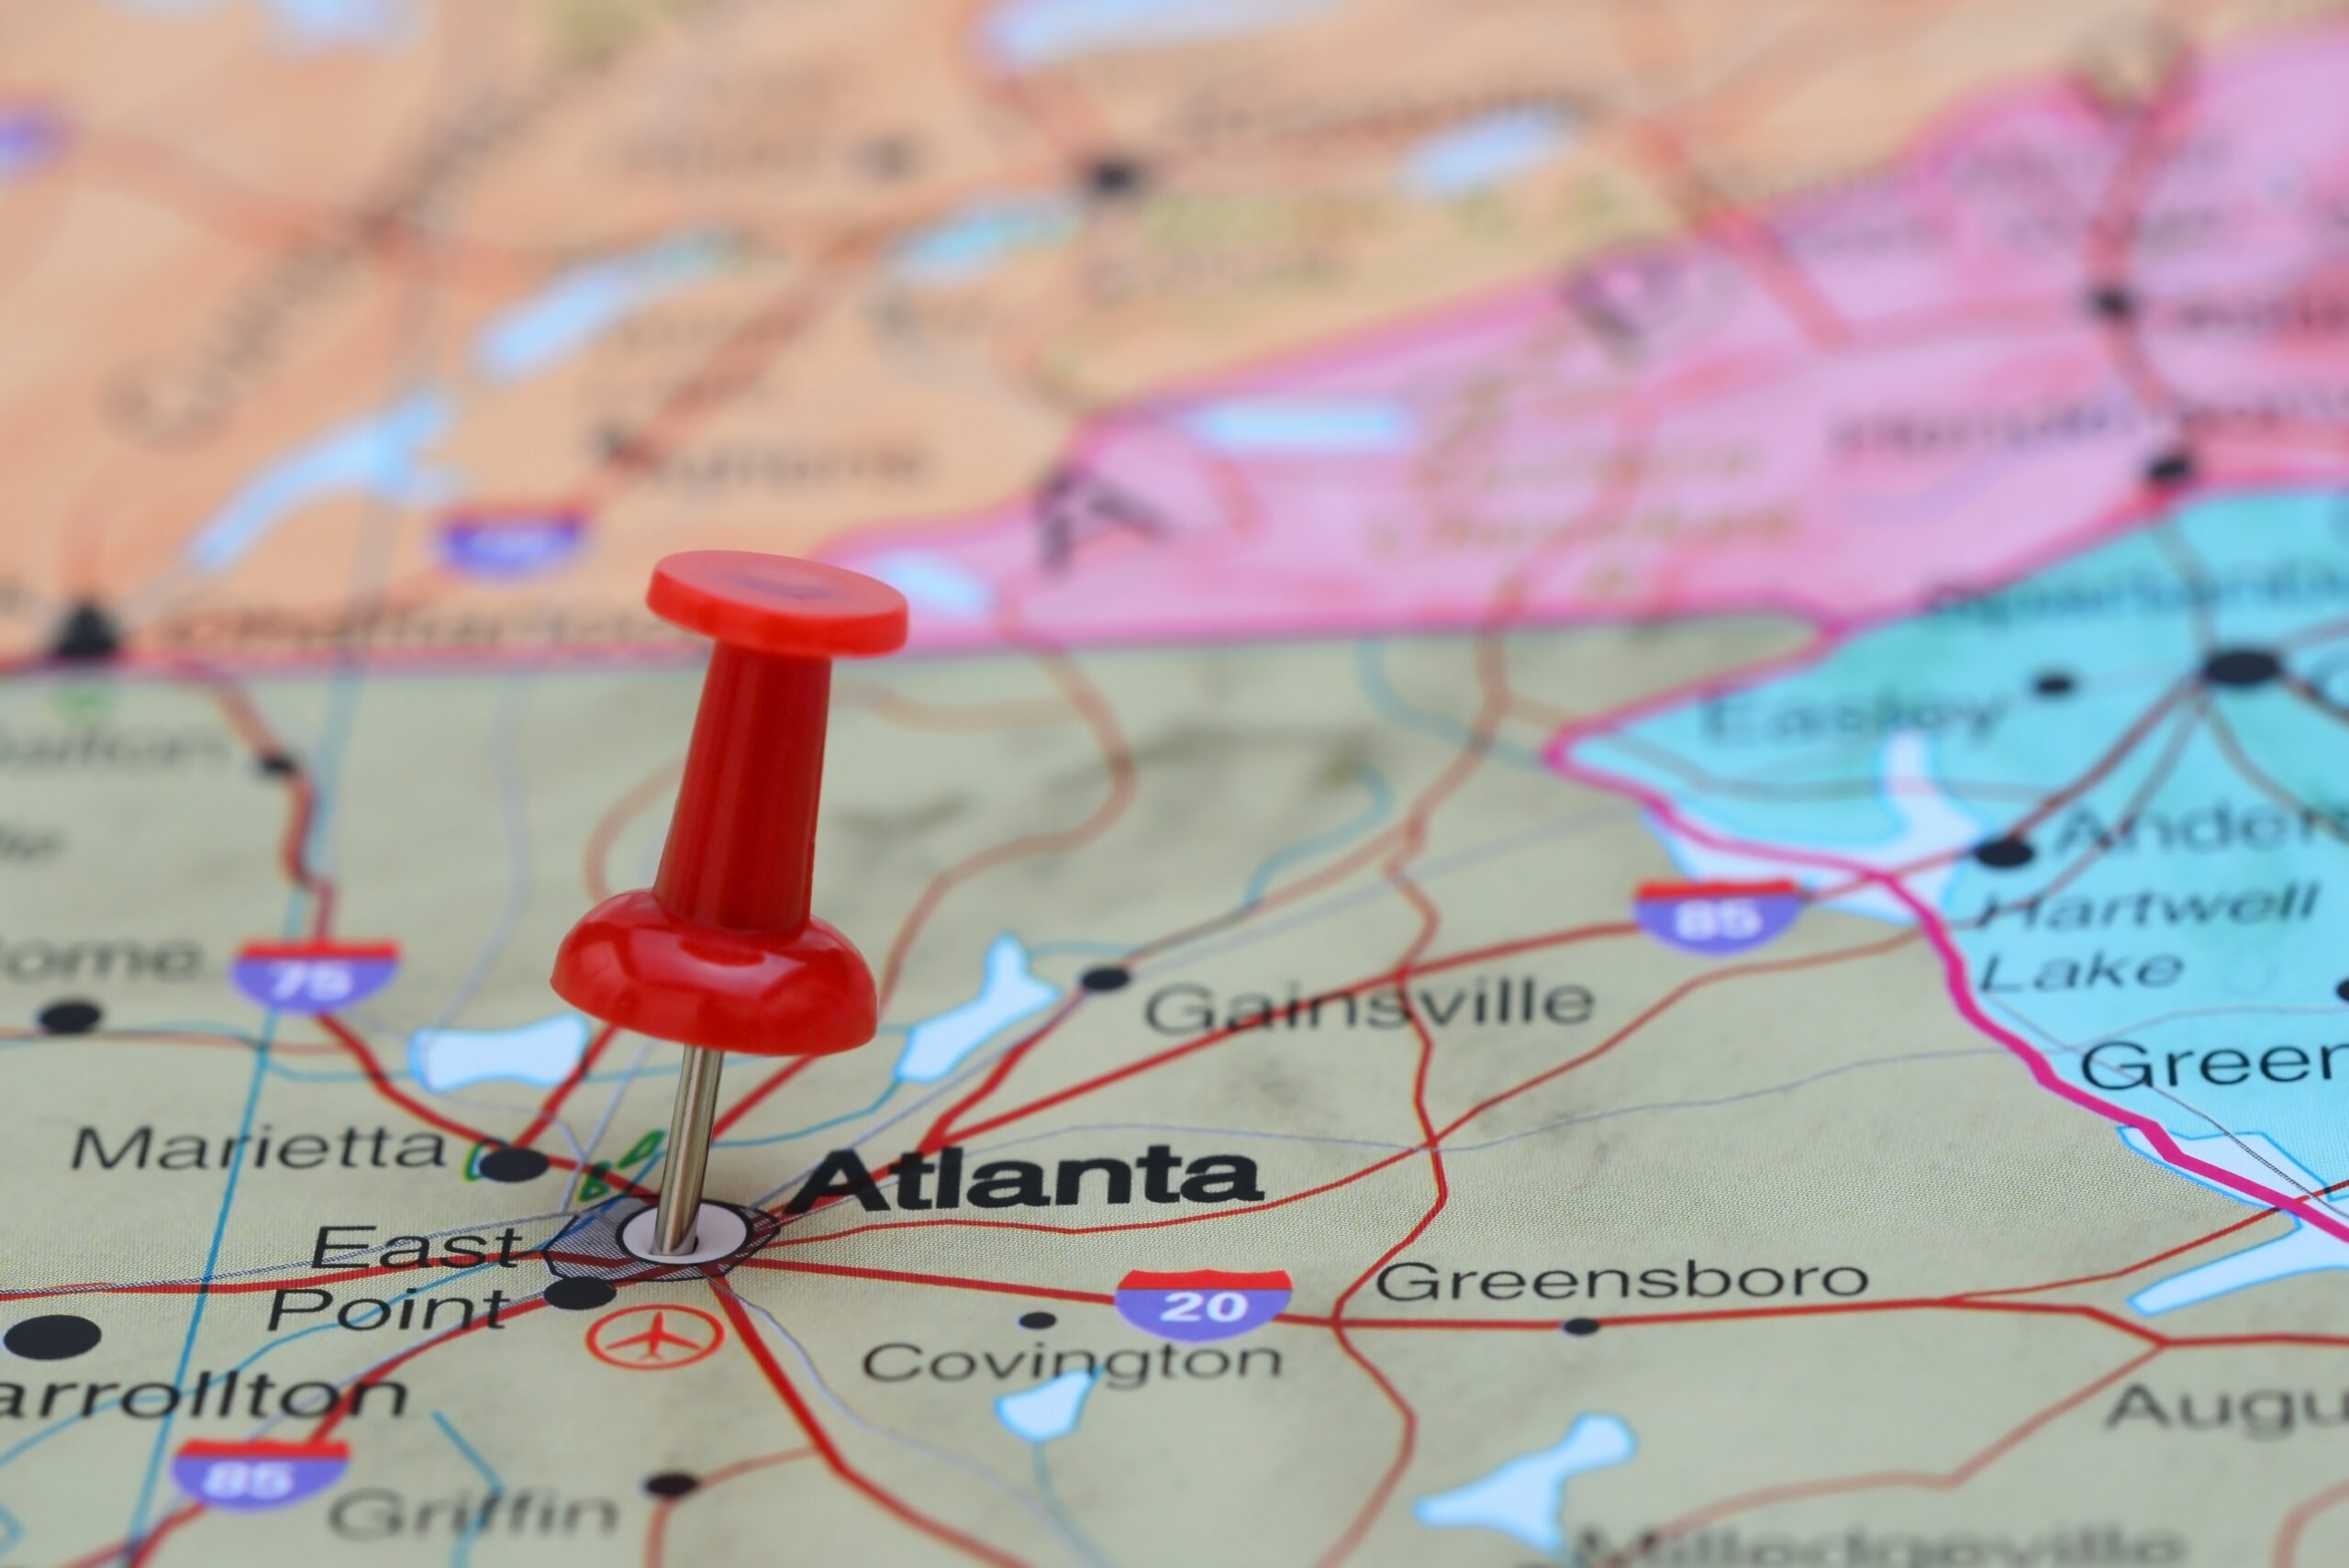 Atlanta scaled How Do Child Actors Get Auditions in Atlanta? A Step-by-Step Guide - 6 Child Actors Get Auditions